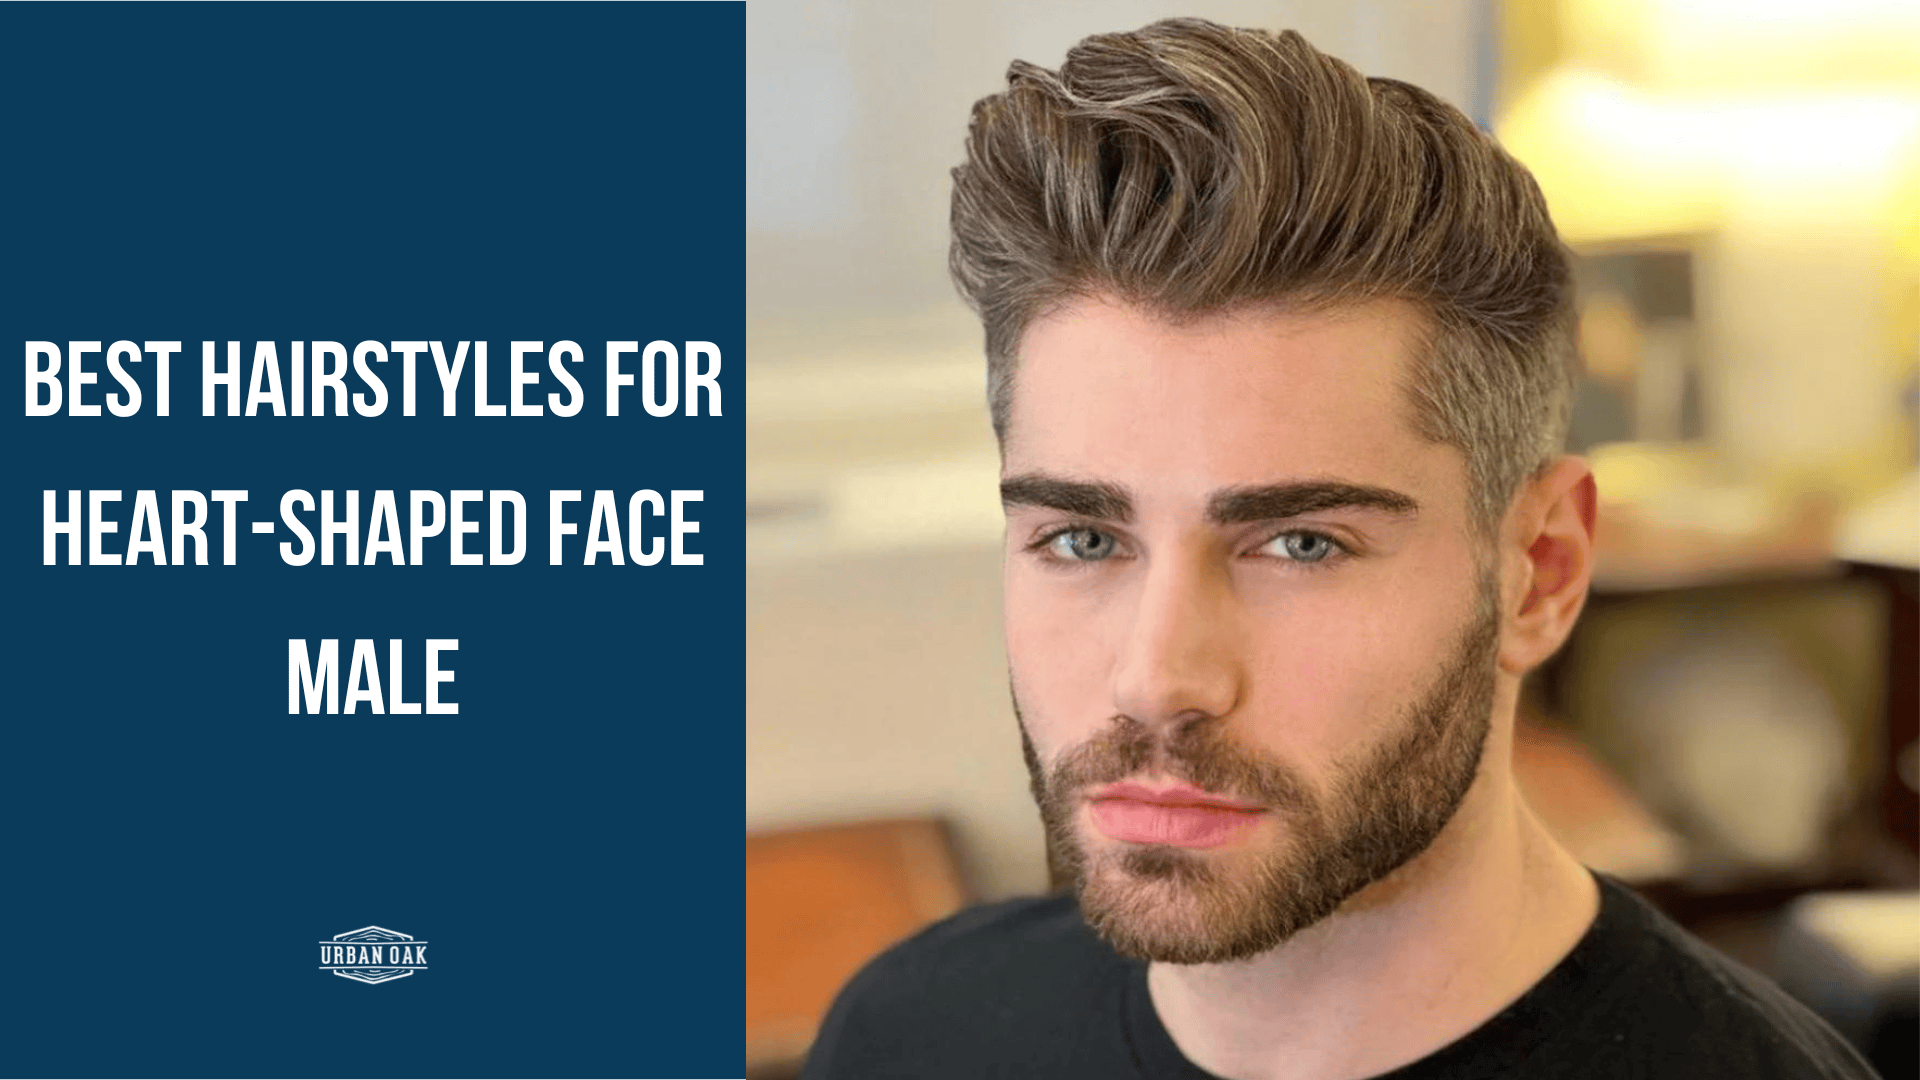 Best Hairstyles for Heart-Shaped Face Male